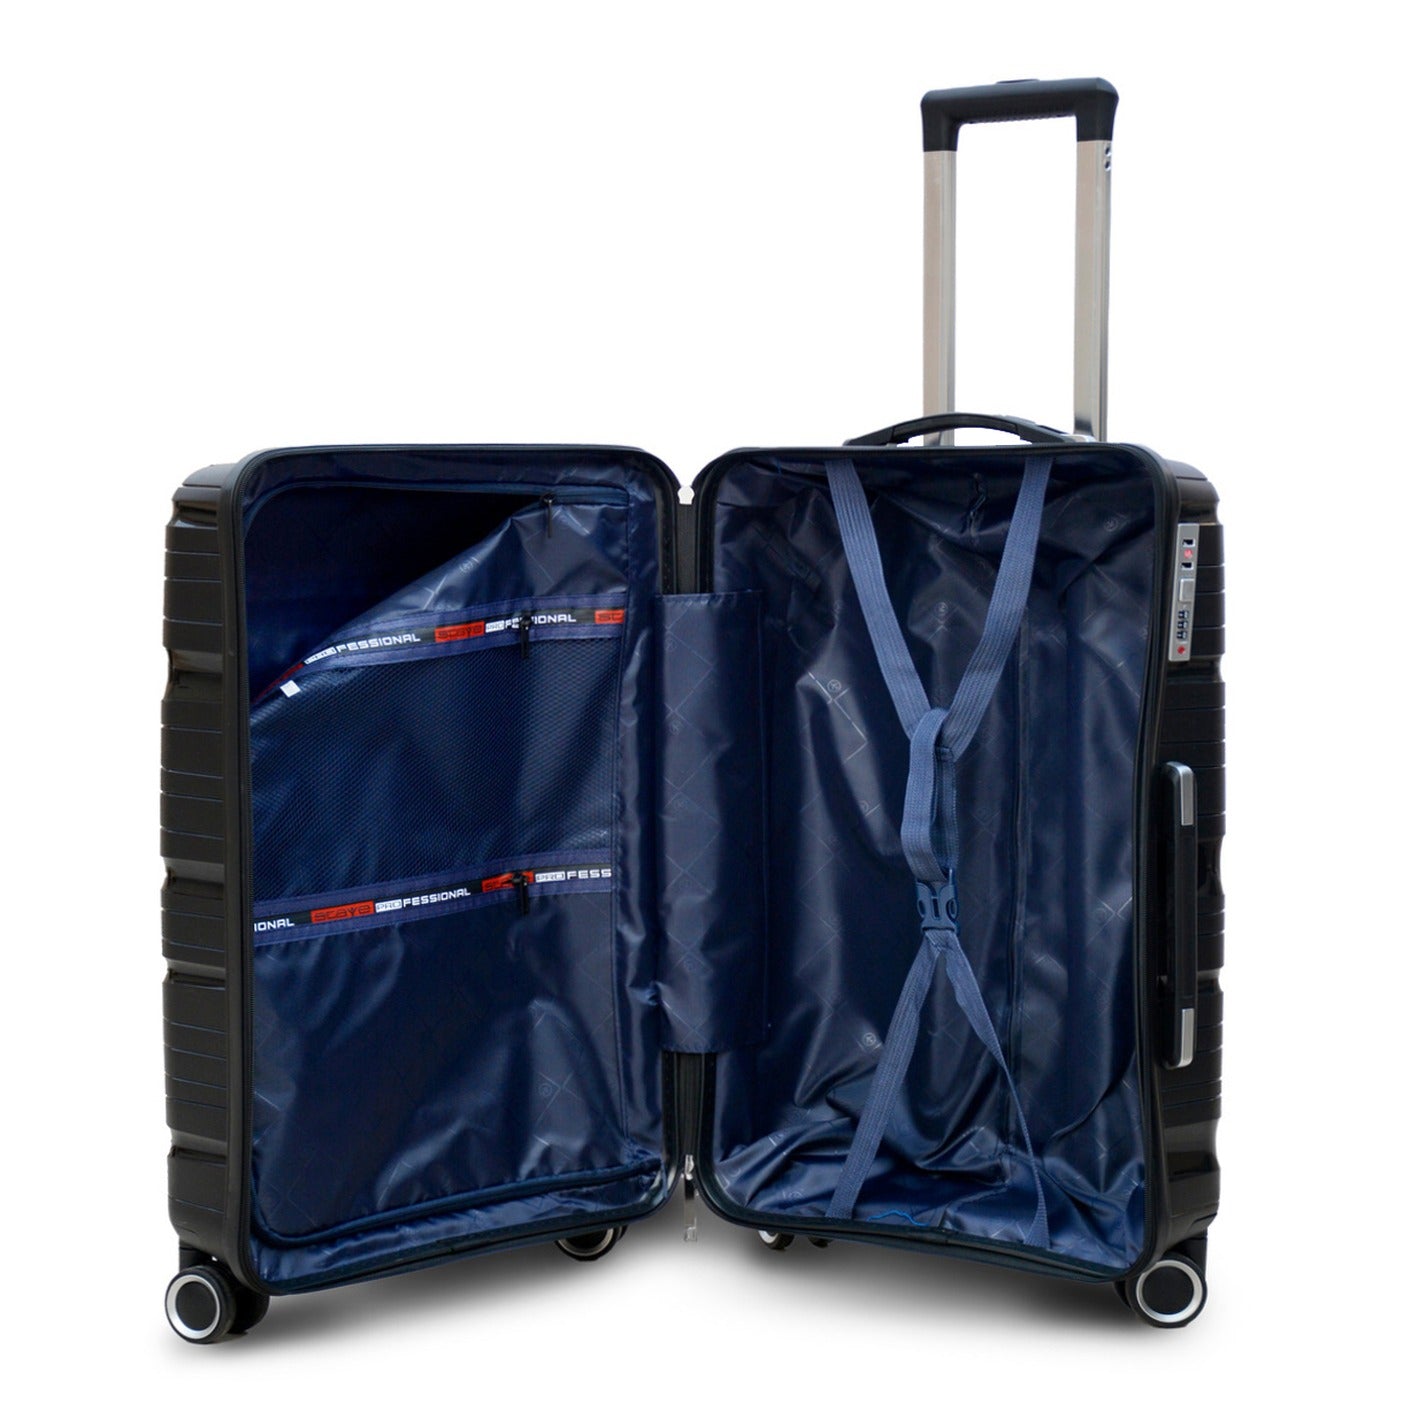 24" Black Colour Royal PP Luggage Lightweight Hard Case Trolley Bag With Double Spinner Wheel